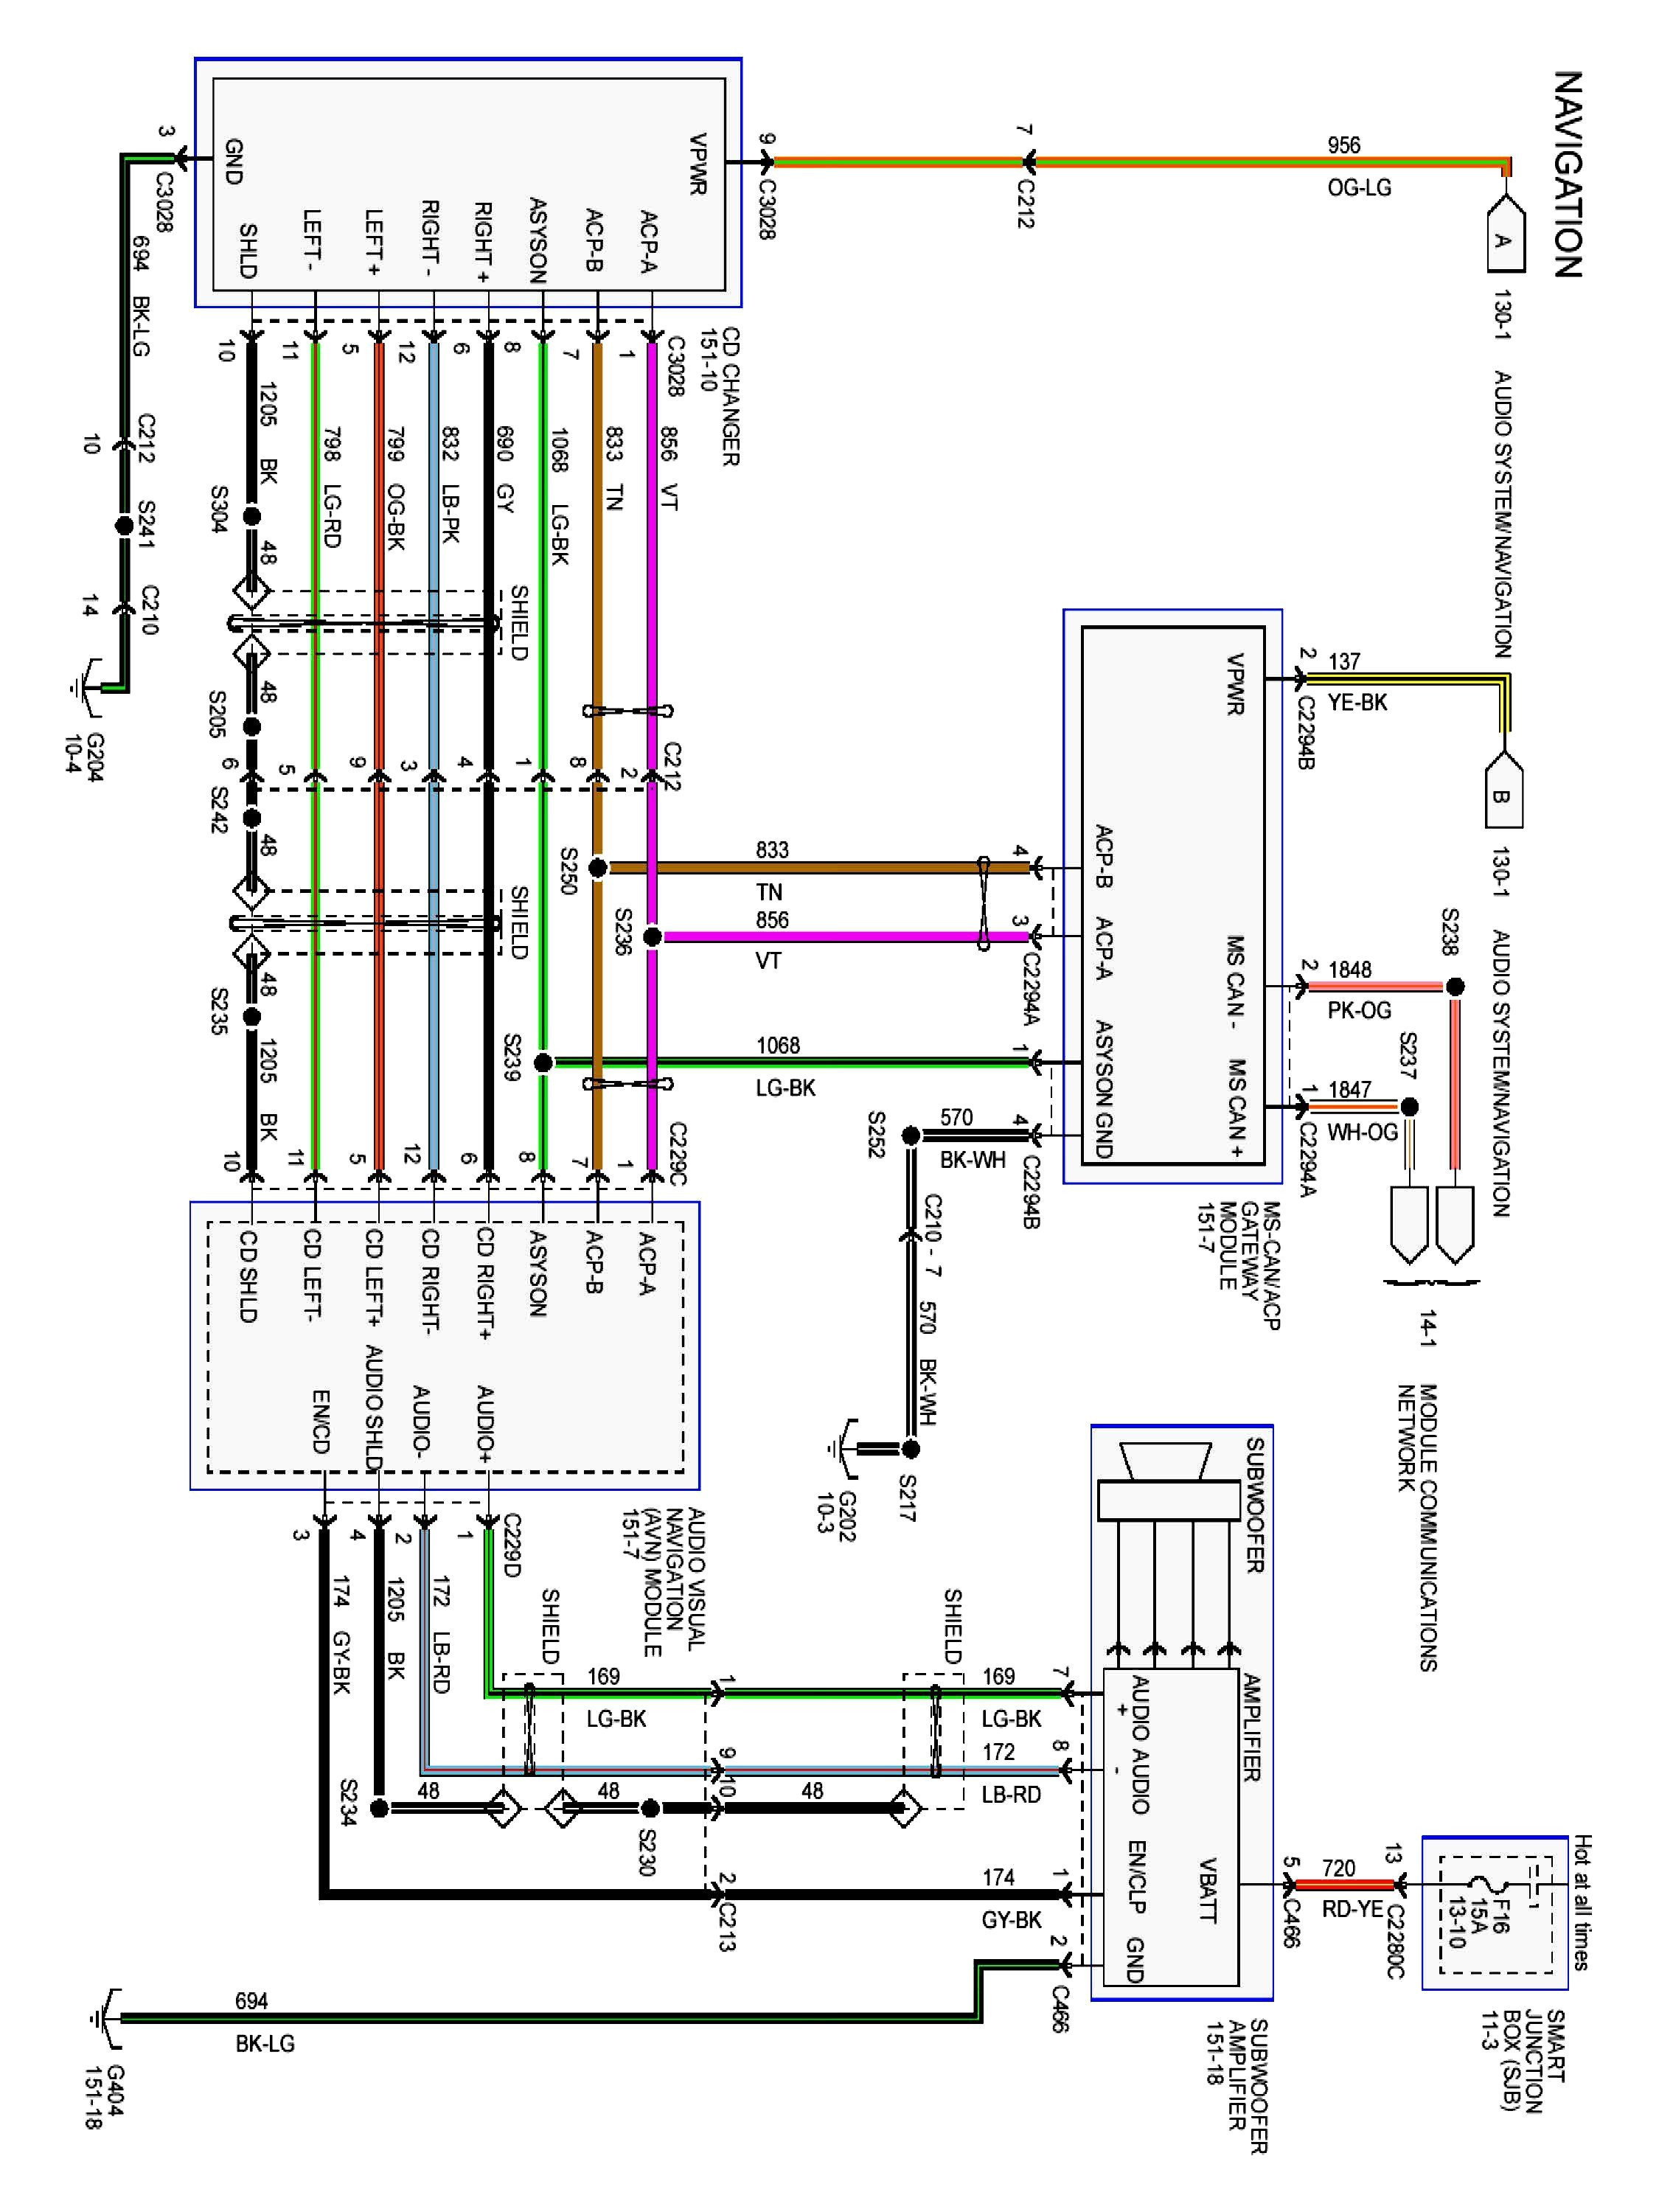 Wiring Diagram Maker 2003 Ford E350 Electrical Diagram Wiring Diagram Directory